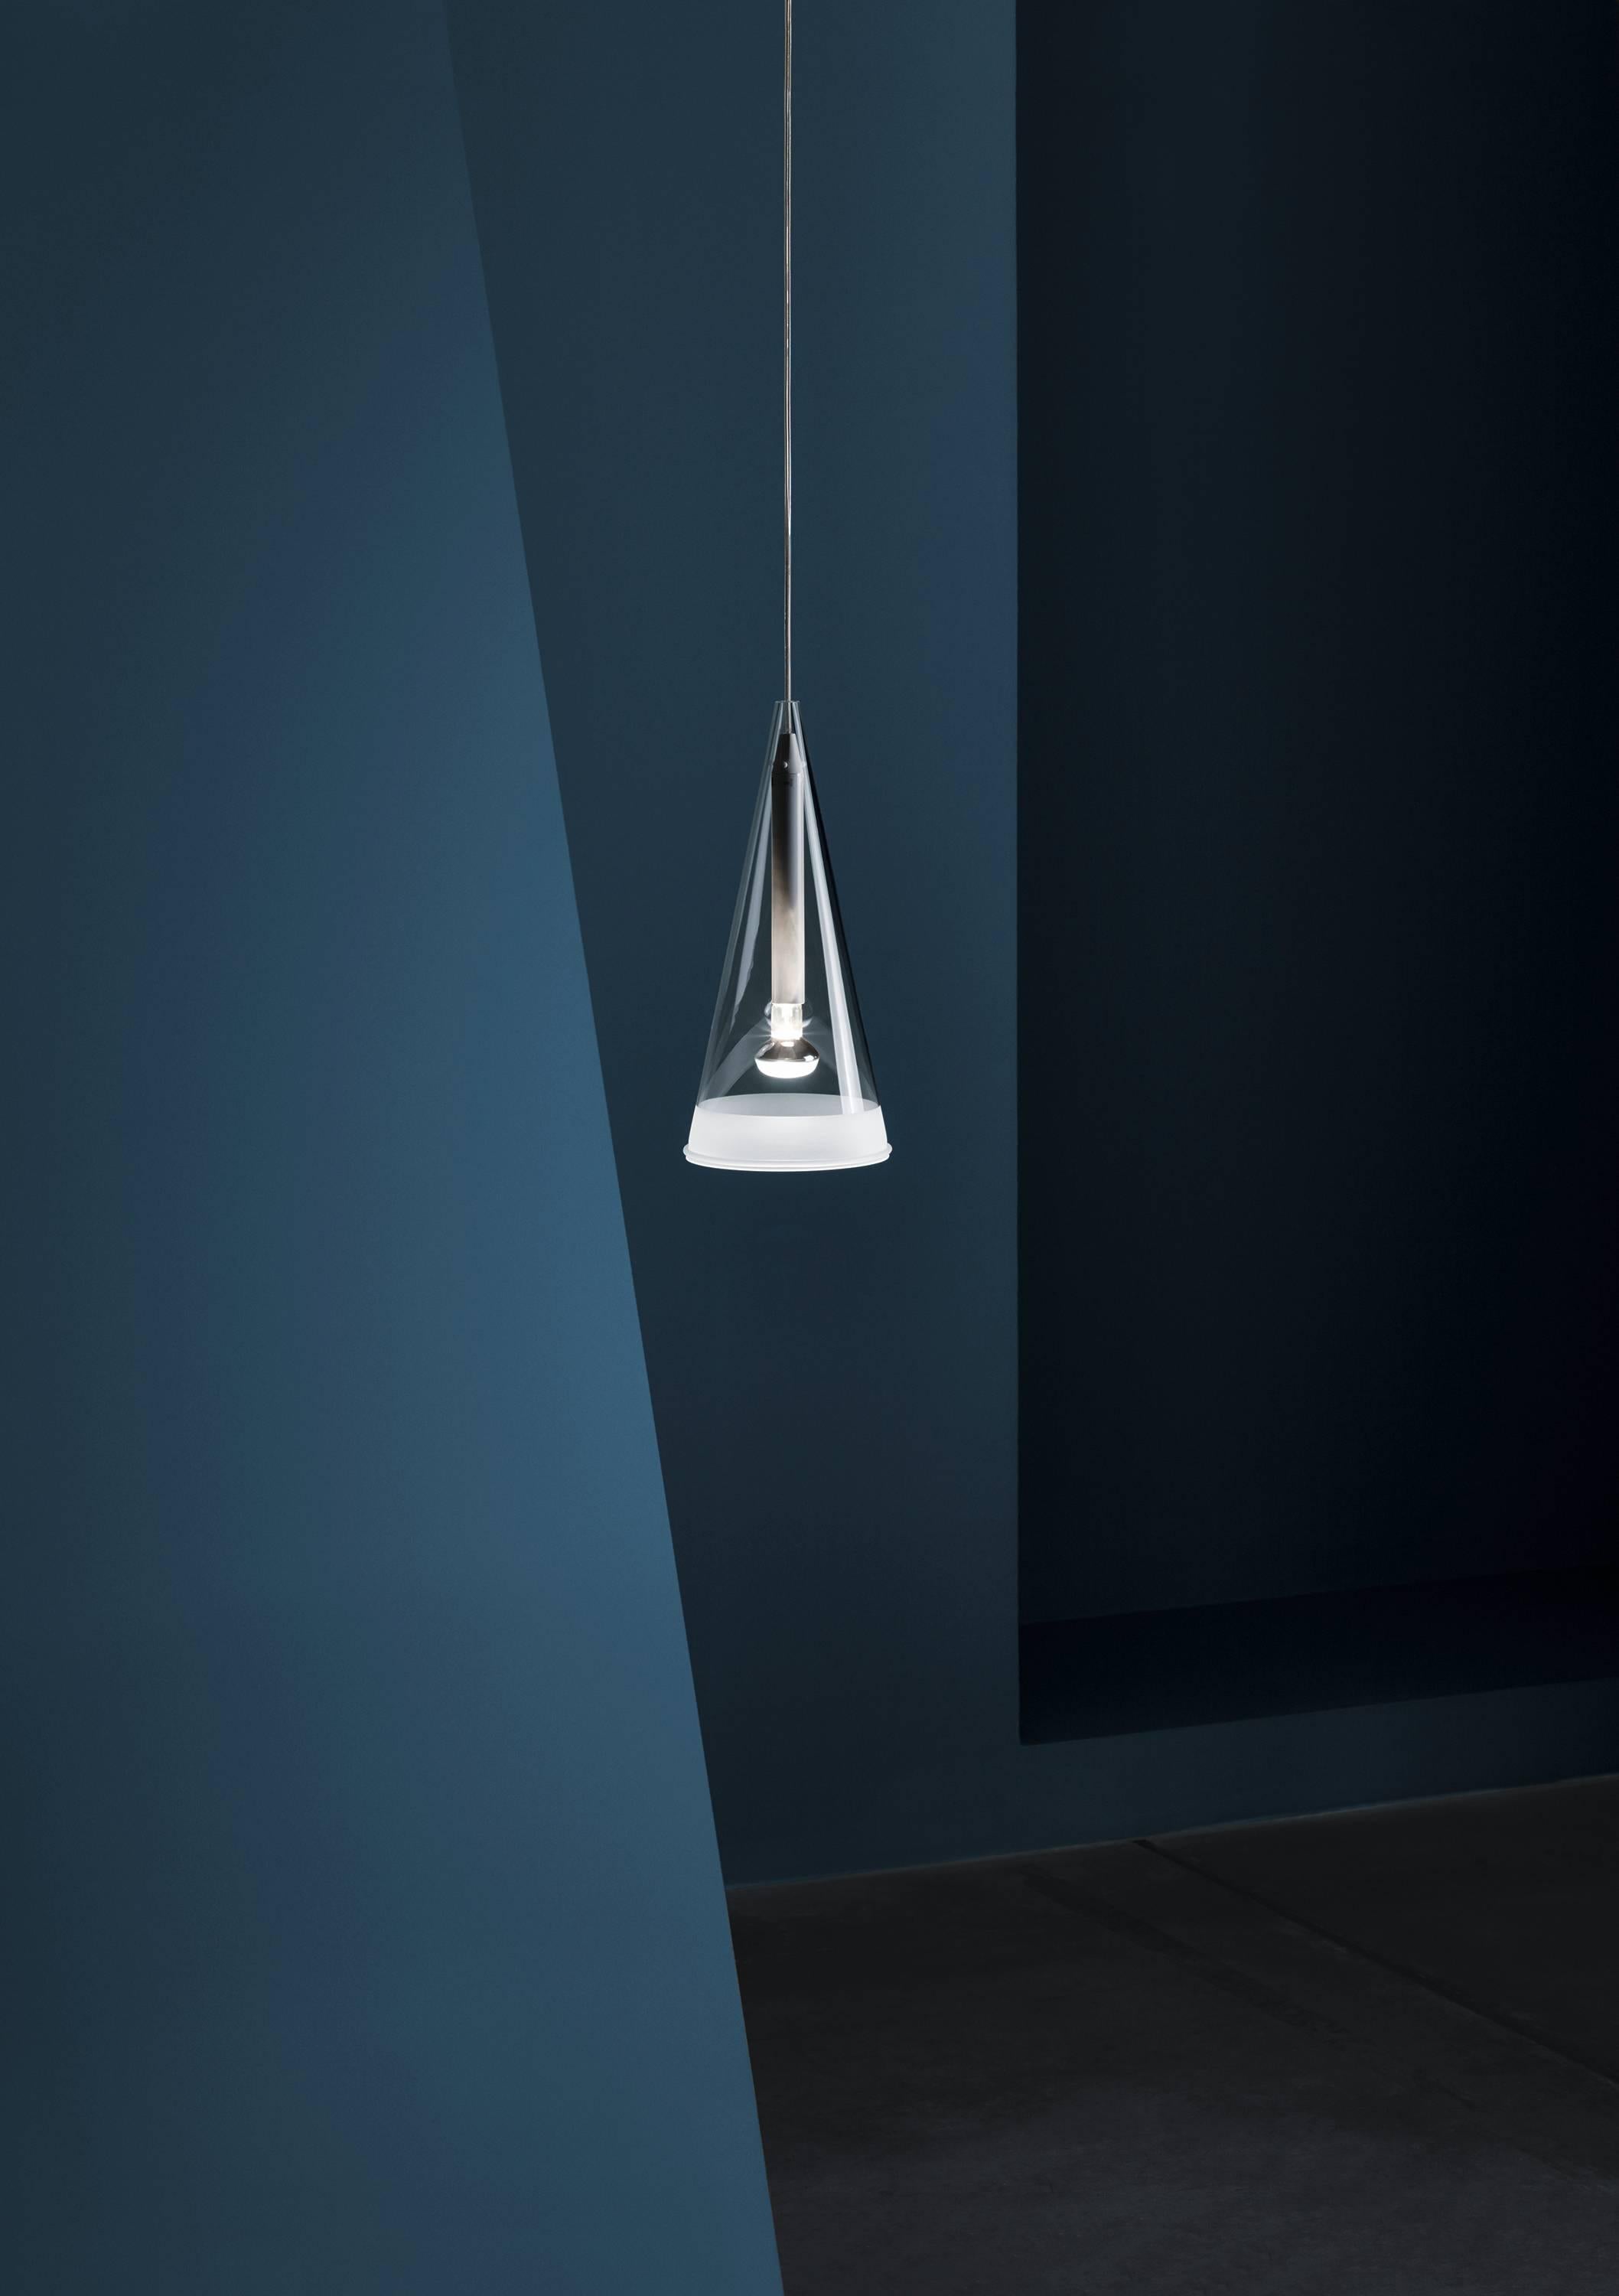 An edgy and industrial look with a sophisticated finish, the Fucsia 1 by Achille Castiglioni is pendant lighting as only he could imagine it. Offering direct and diffused light, the conical blown glass diffuser is finished with a 1.5